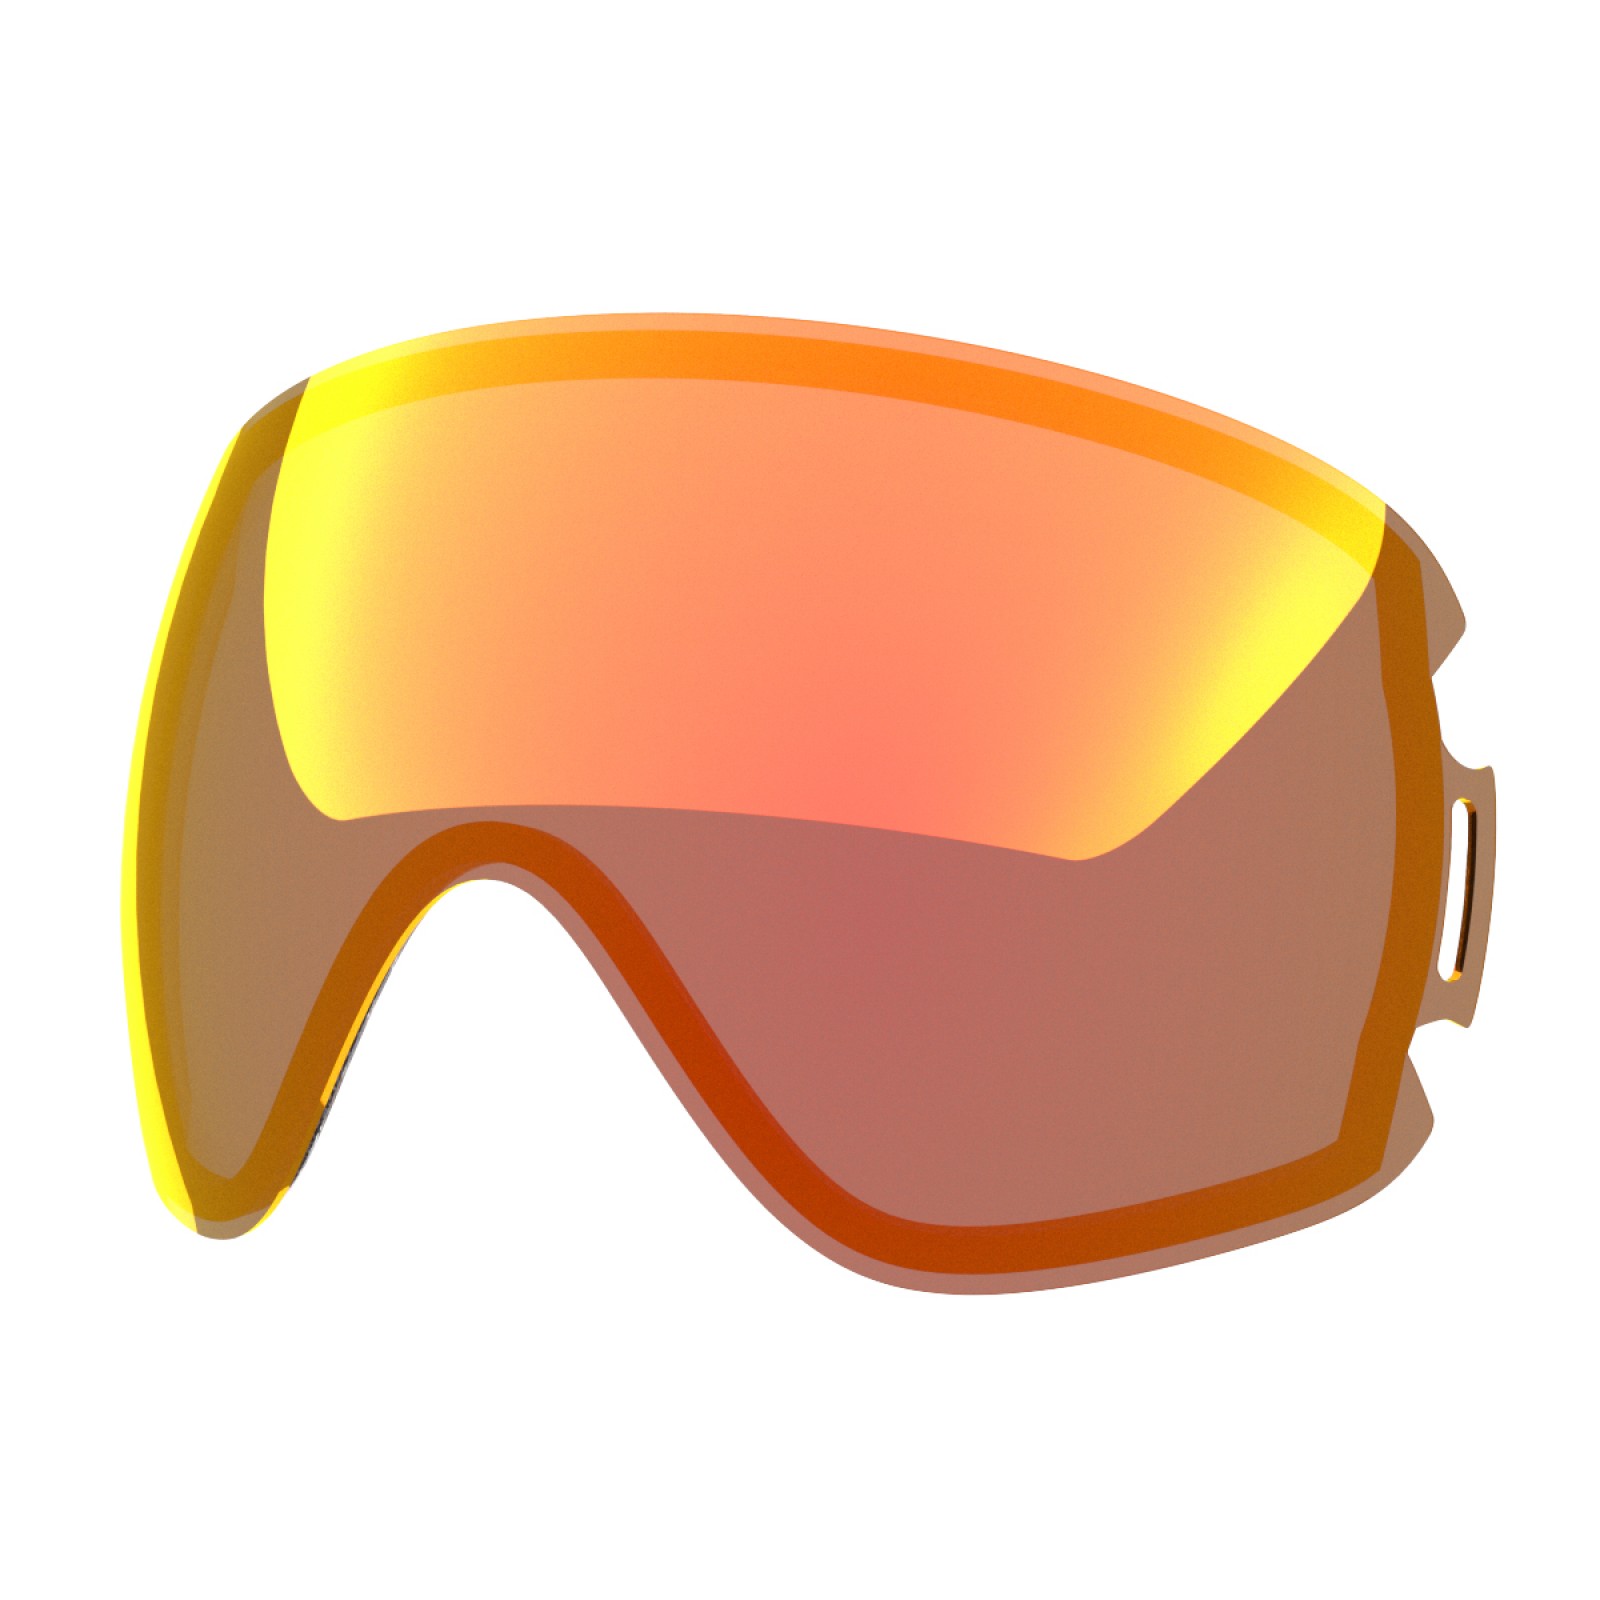 The One Fuoco lens for Open goggle